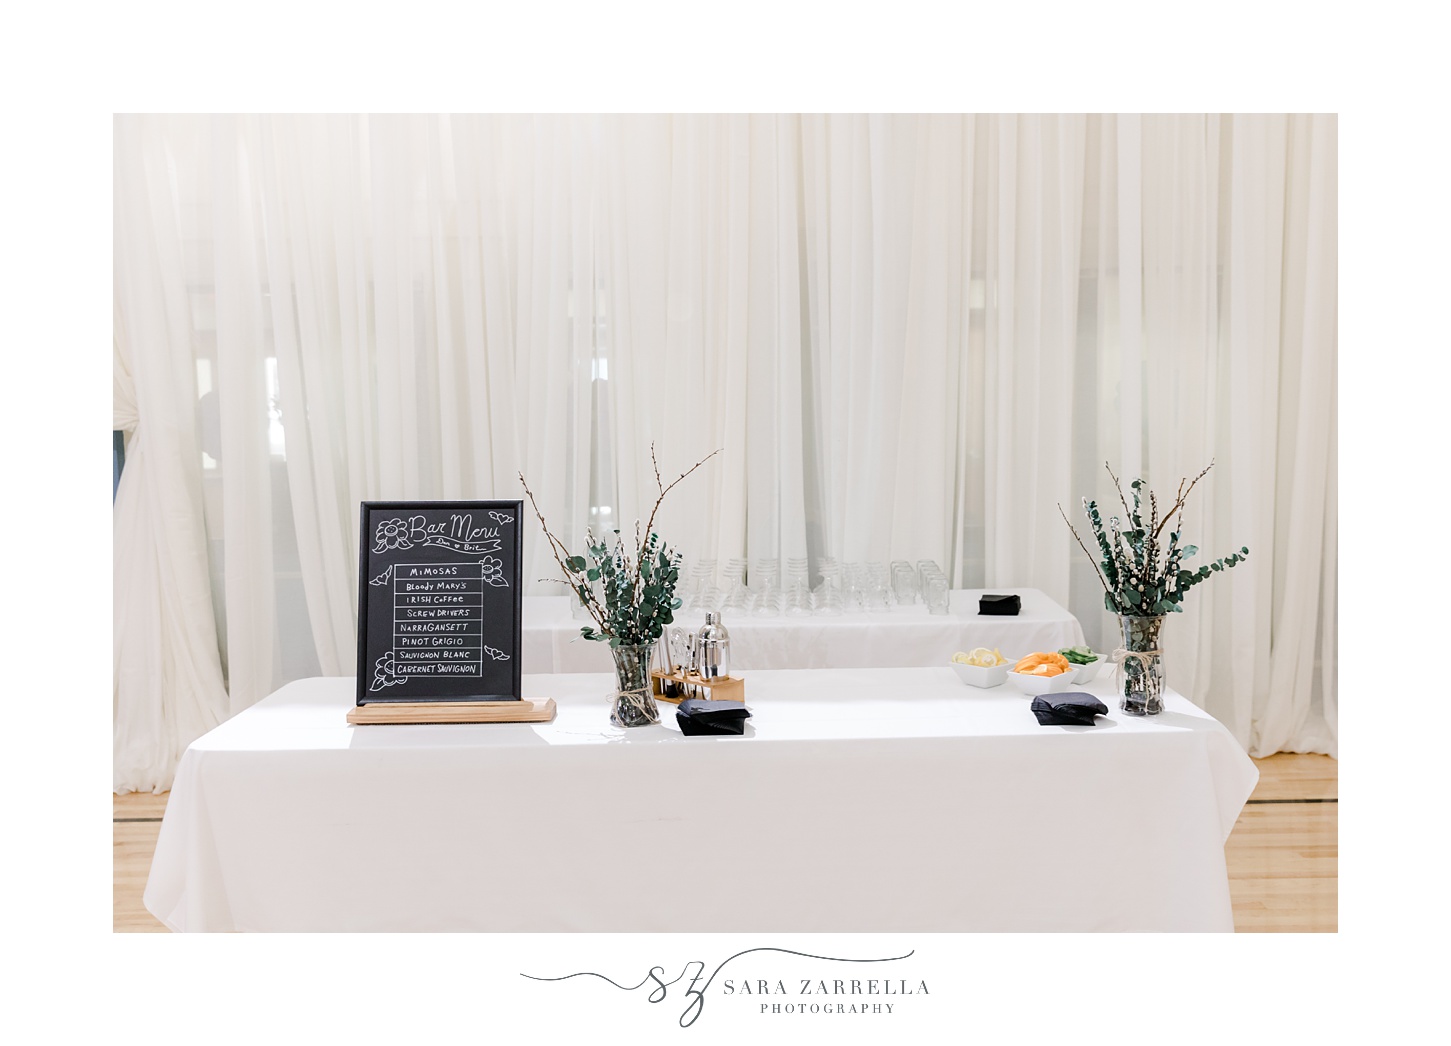 gift table with candle and greenery in flower vases 